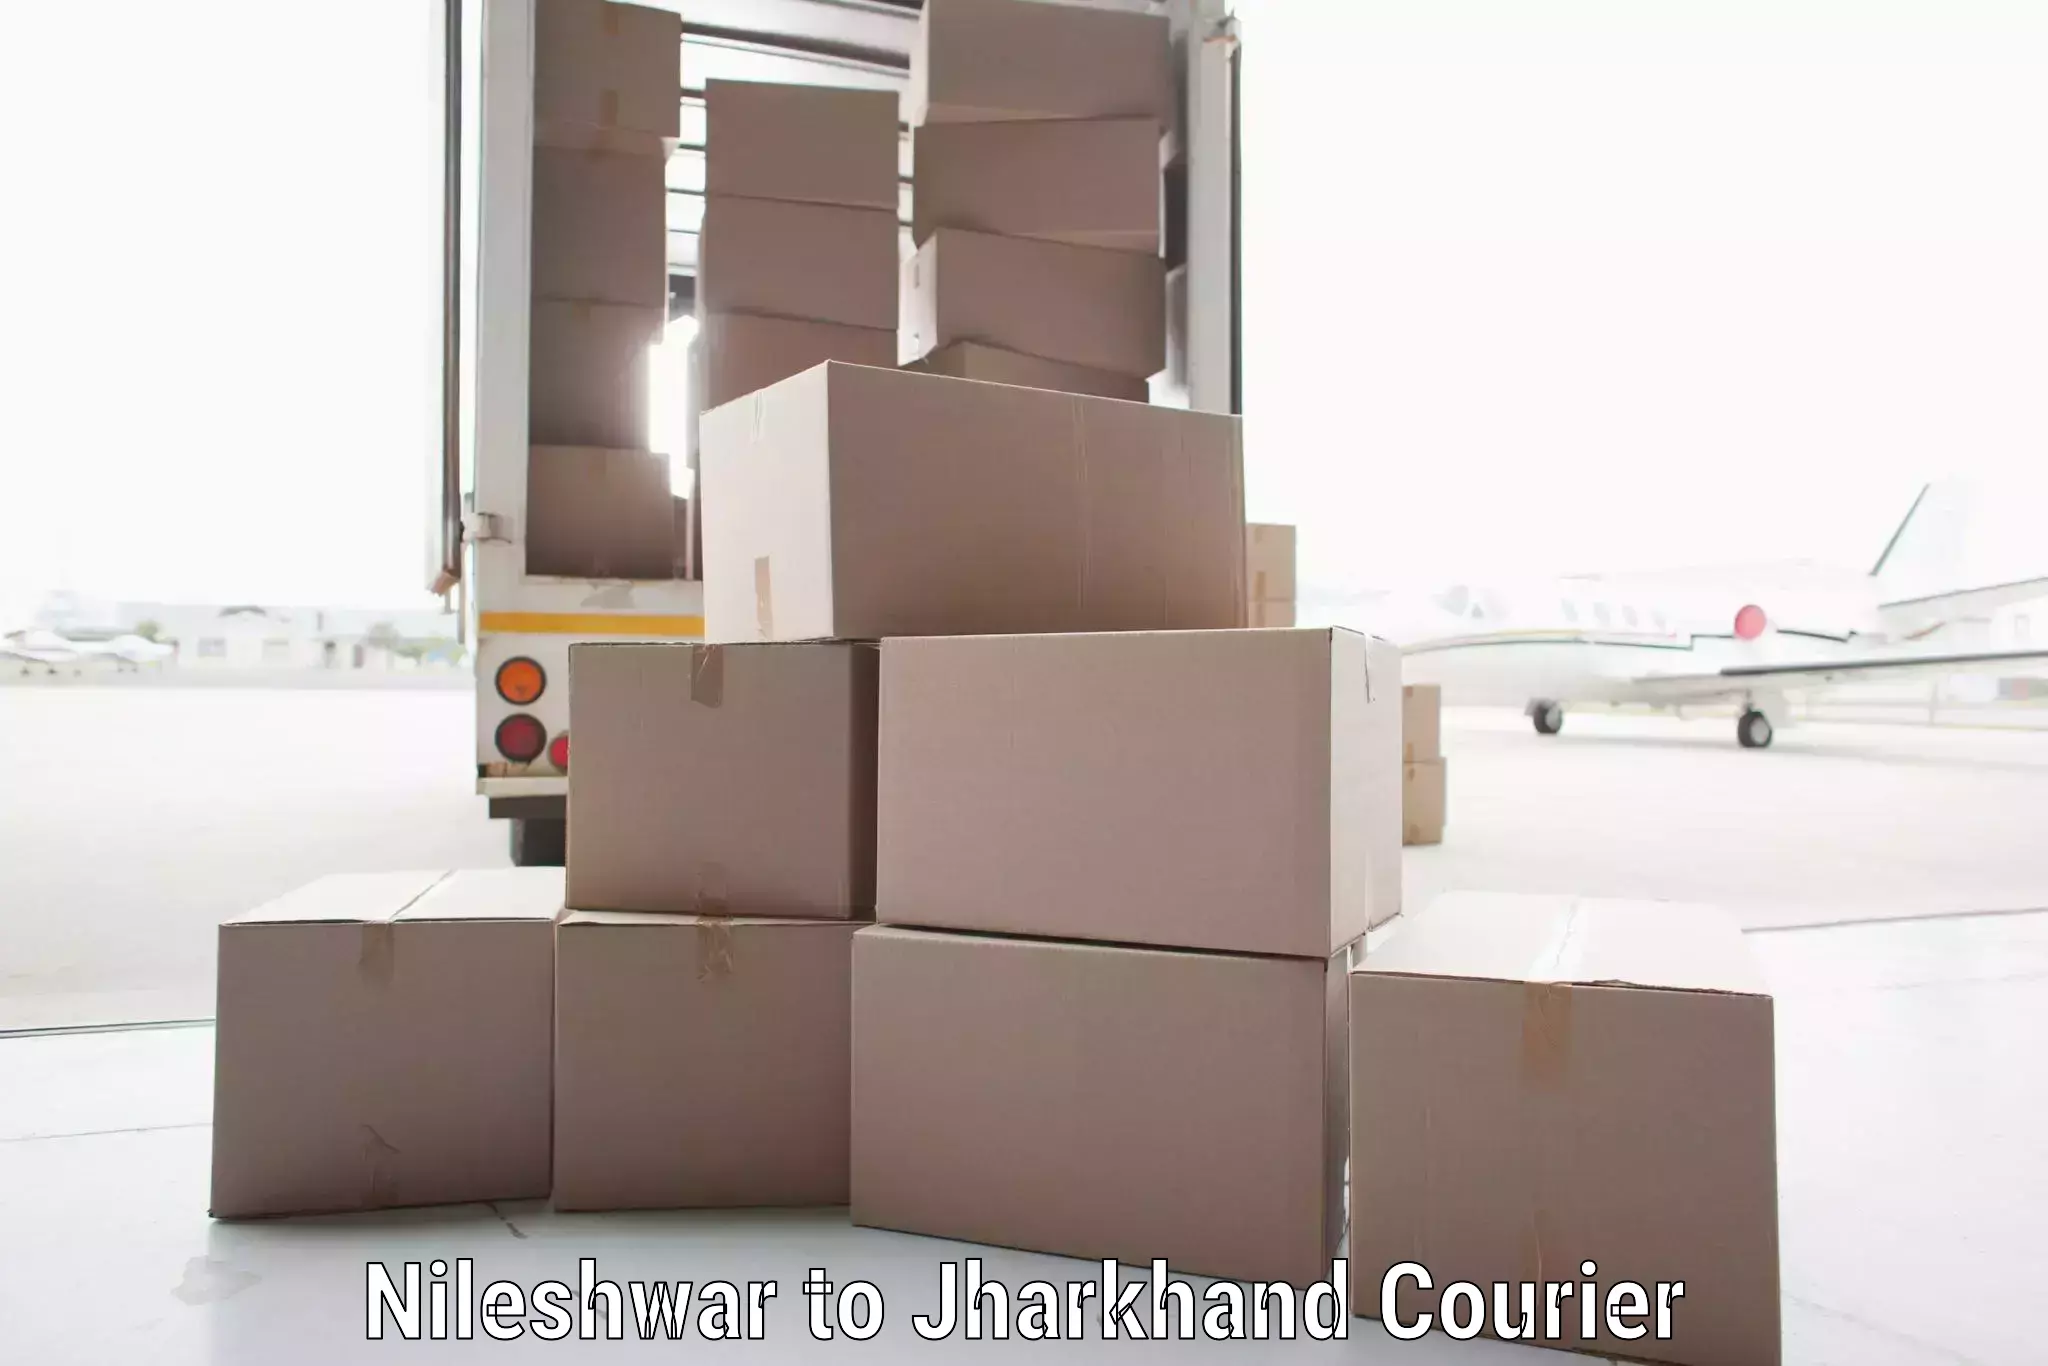 Courier service comparison in Nileshwar to Ranchi